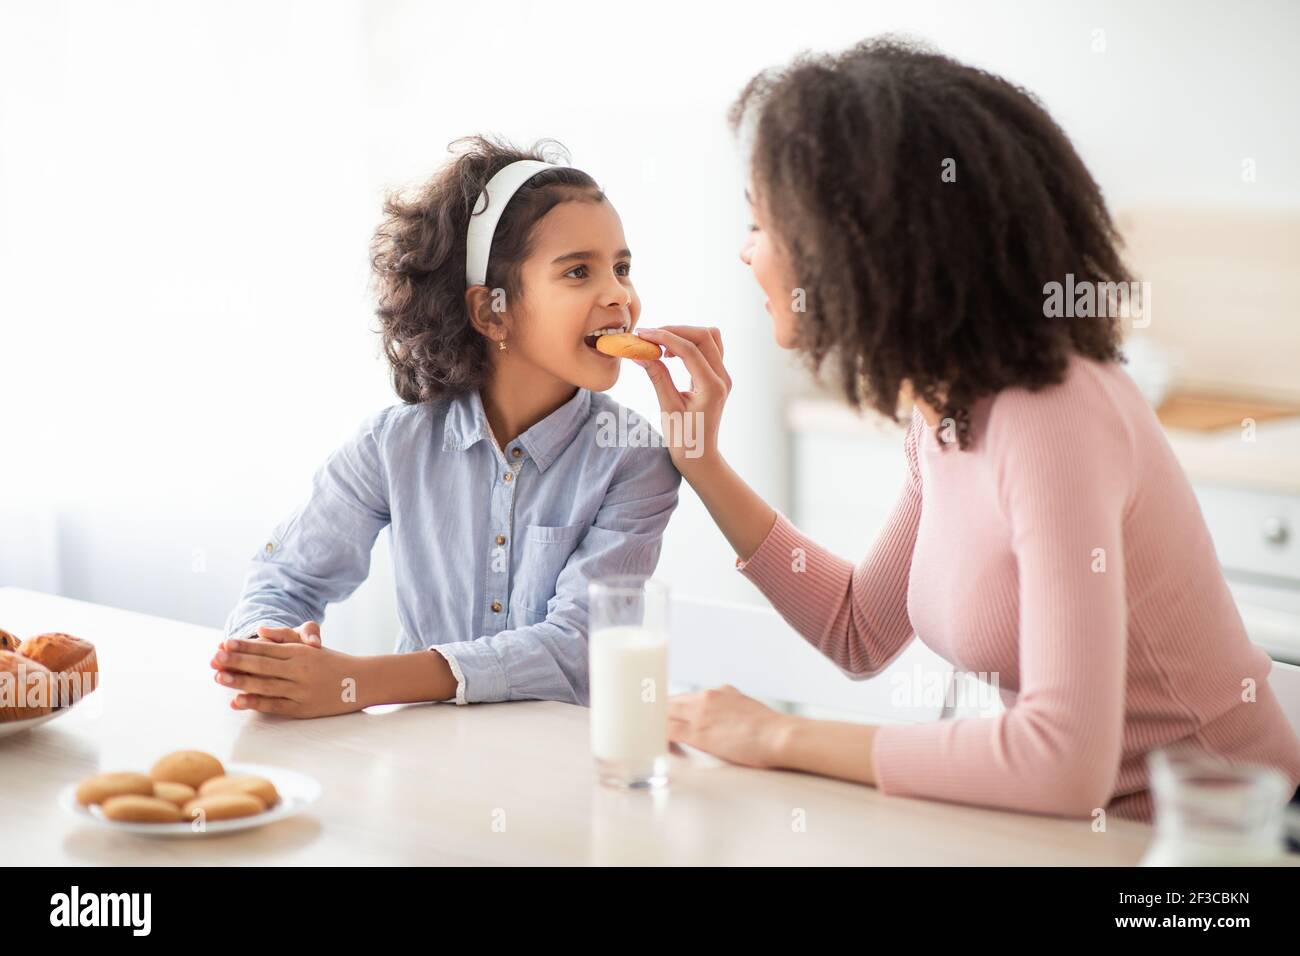 Cheerful african american woman feeding girl with cookie Stock Photo